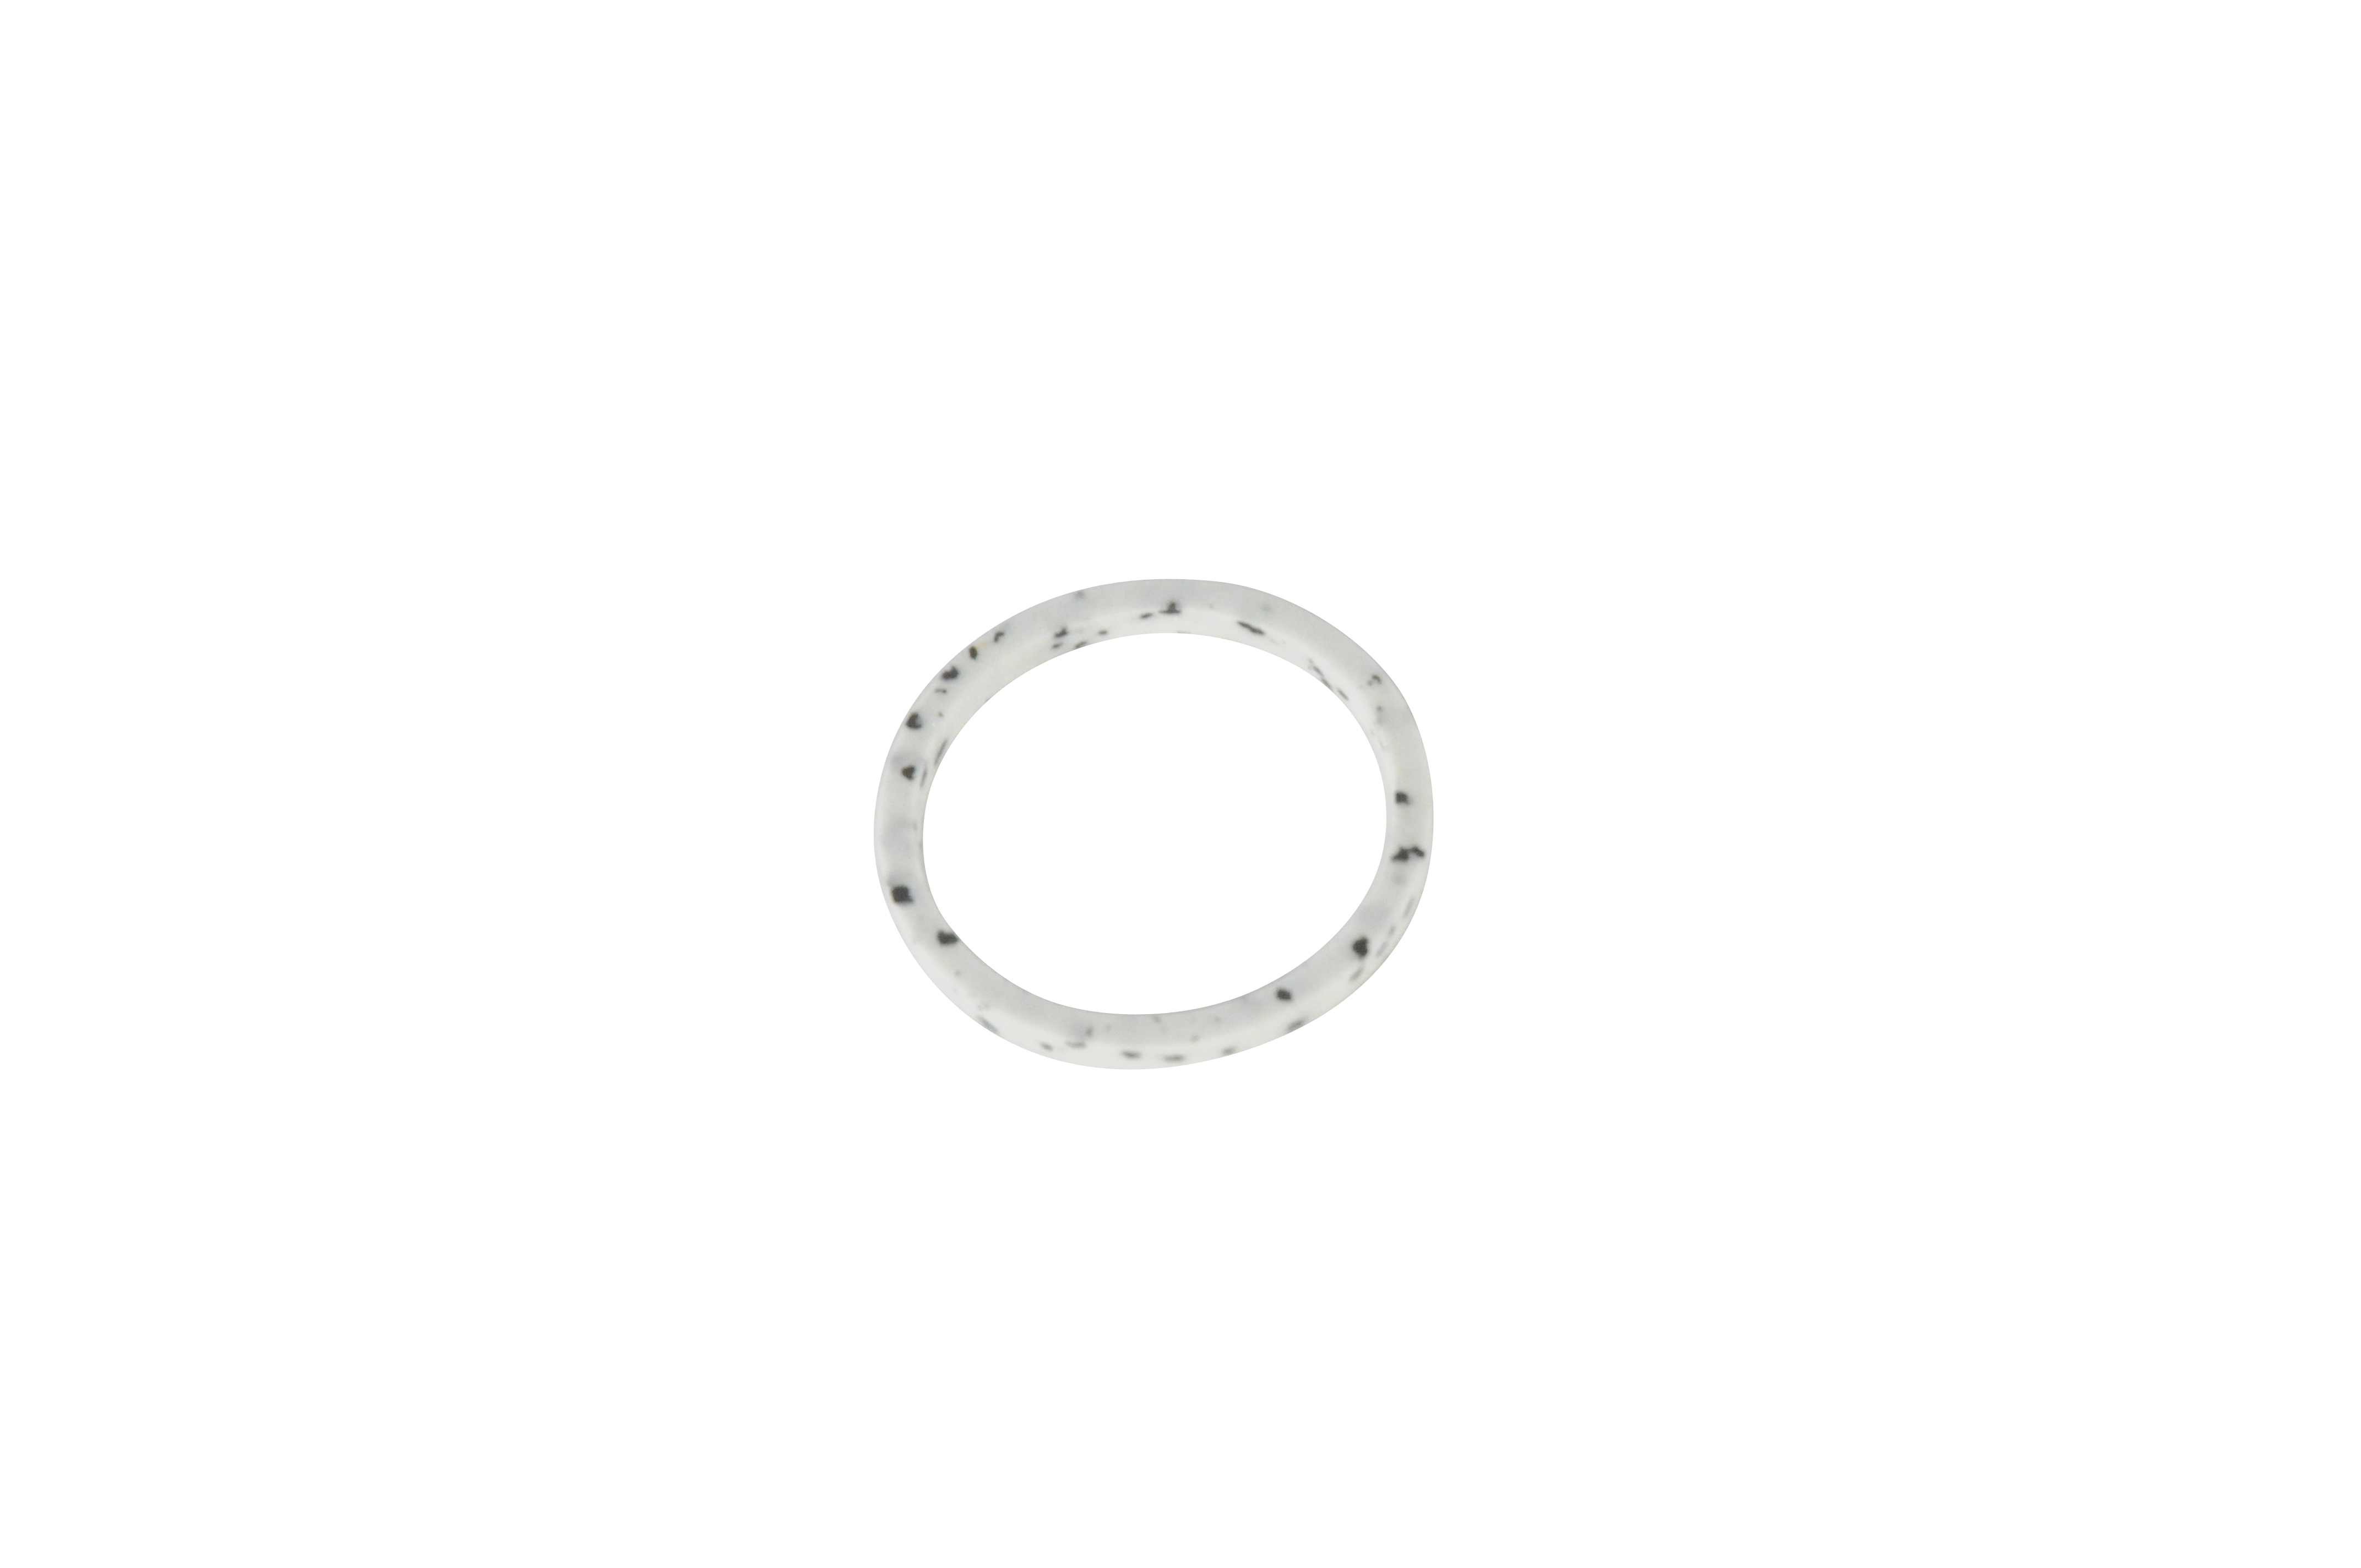 GM GENUINE PARTS - Automatic Transmission Turbine Shaft Fluid Seal Ring - GMP 24225511